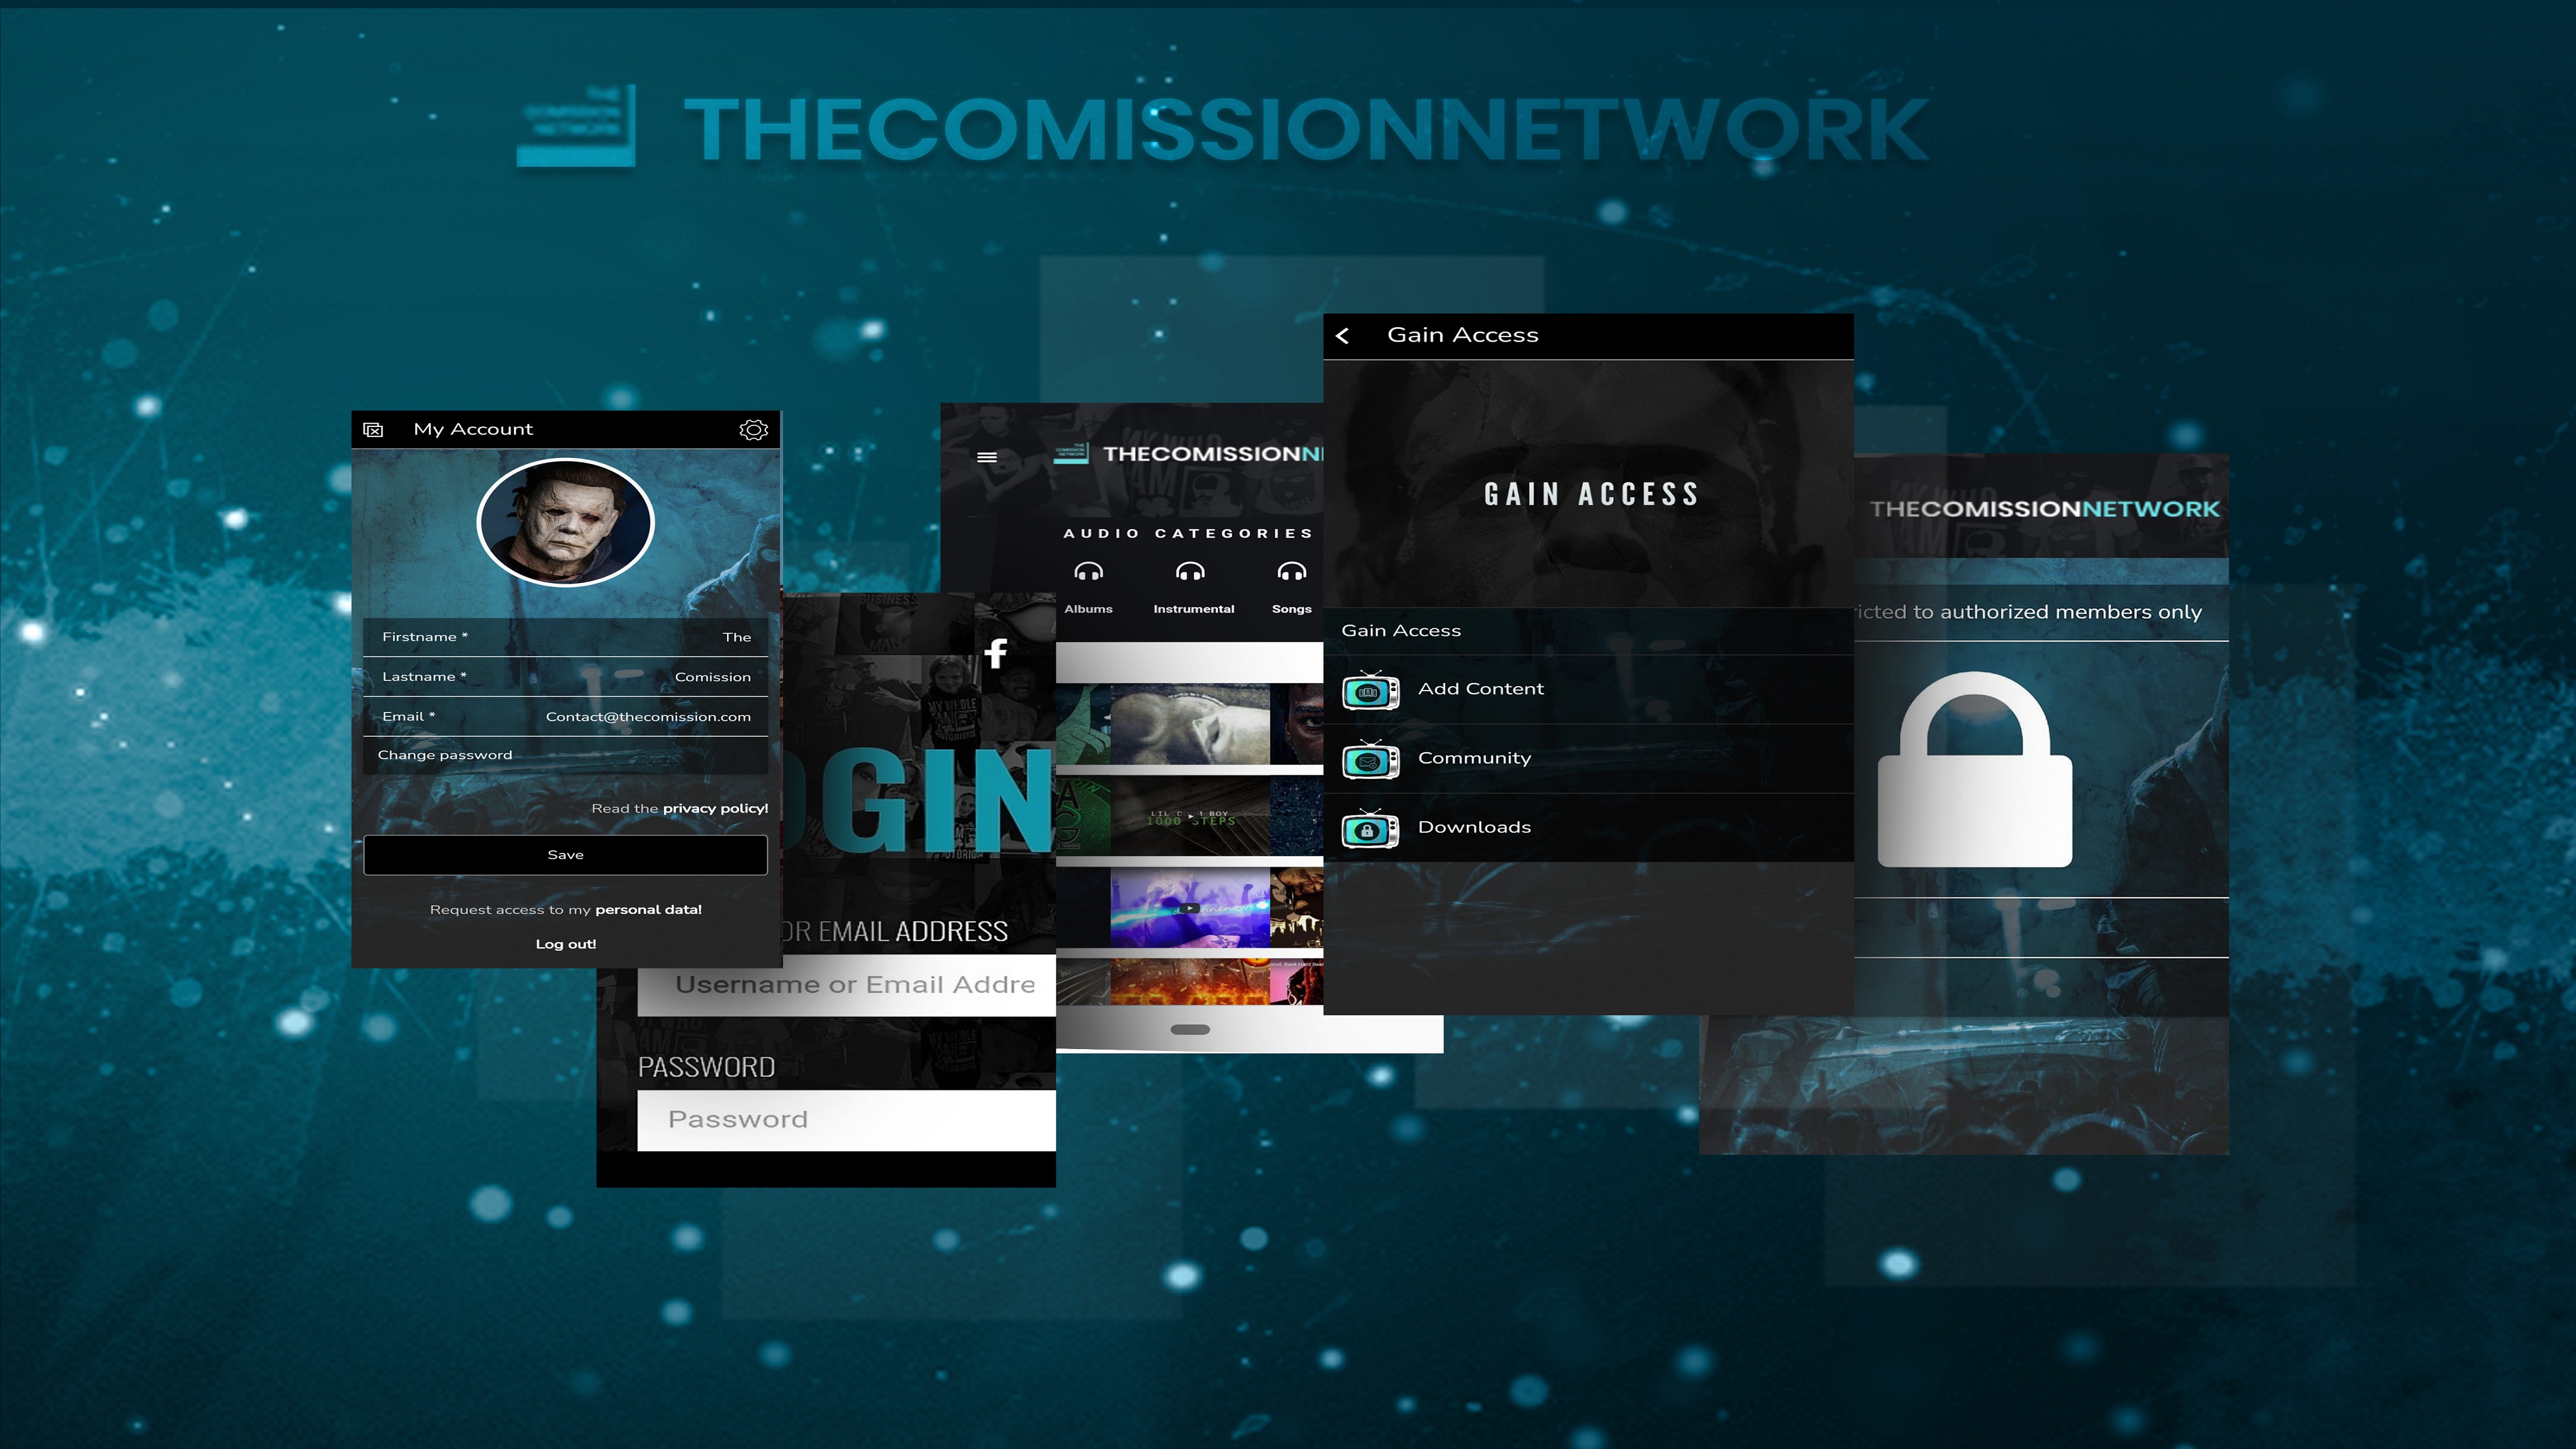 GAIN ACCESS: THECOMISSION